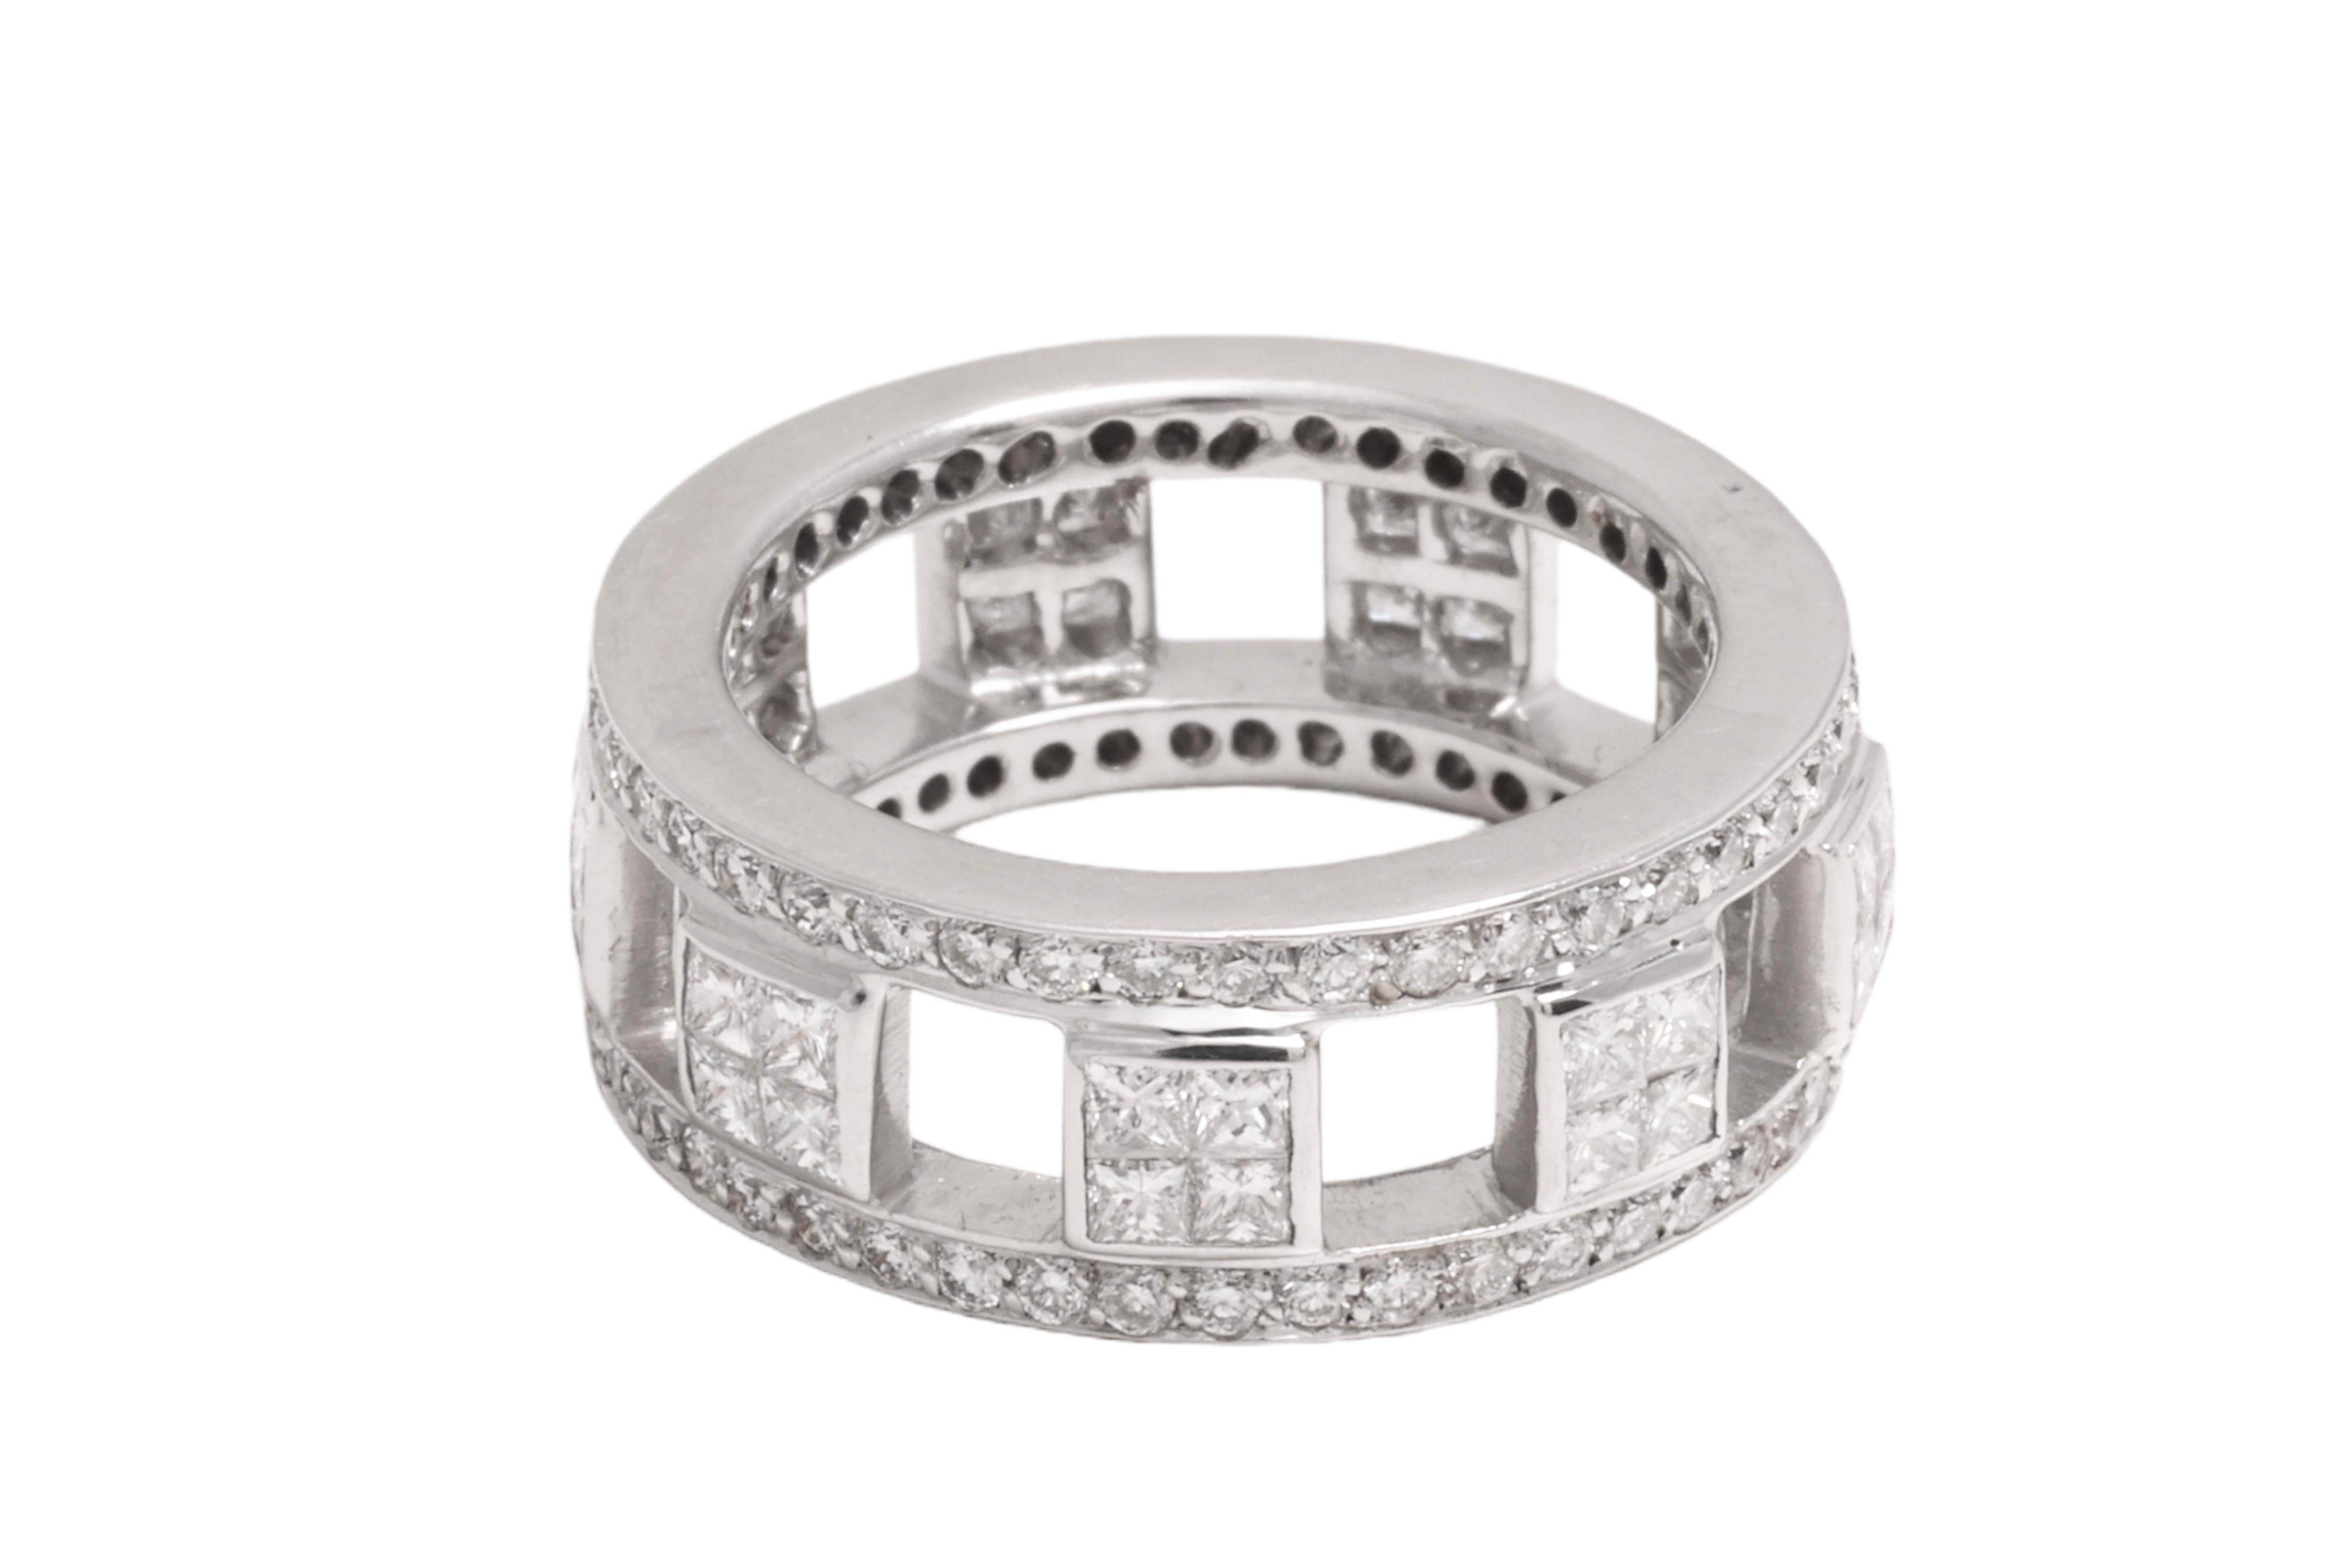 Women's 18 kt. White Gold Eternity Ring With 1.92 ct. Princess & Brilliant Cut Diamonds For Sale